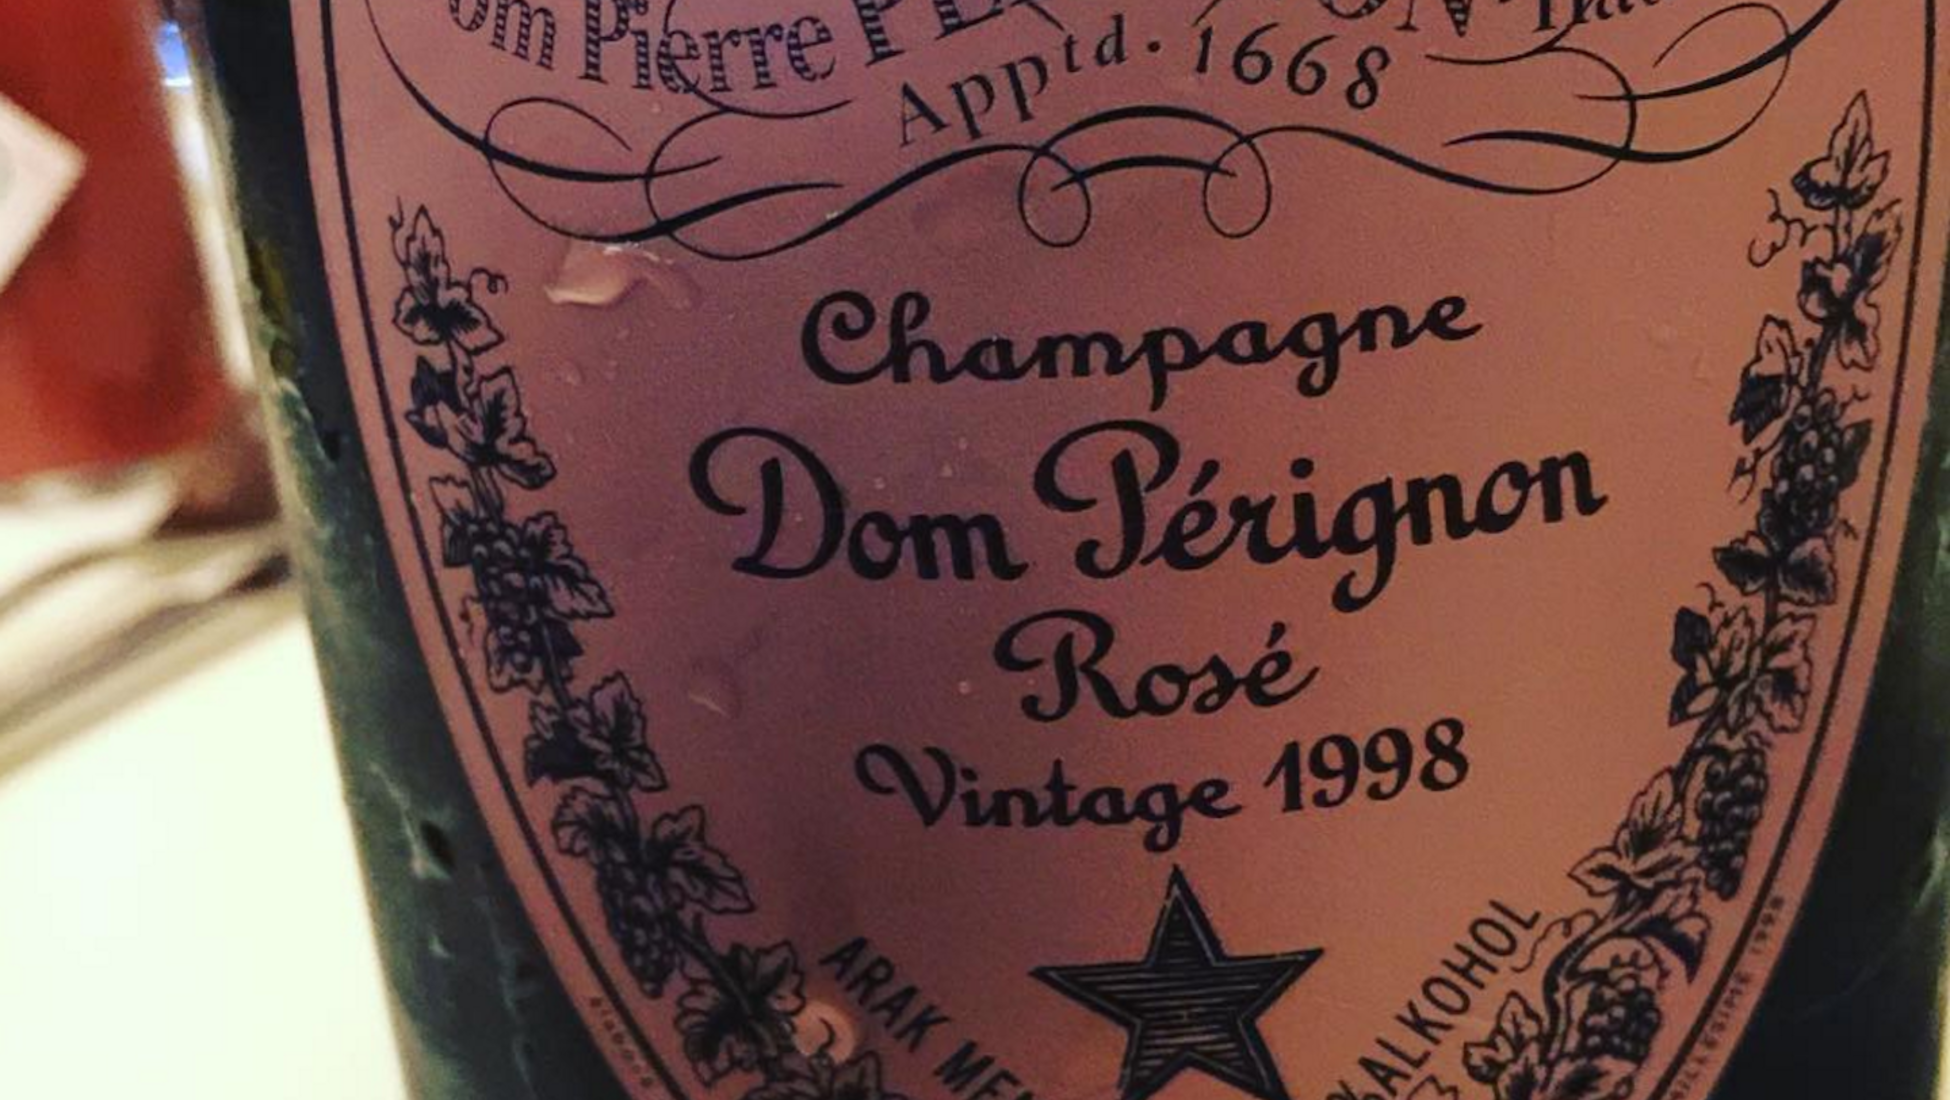 Most Expensive Vintage Champagne in the World? - HubPages